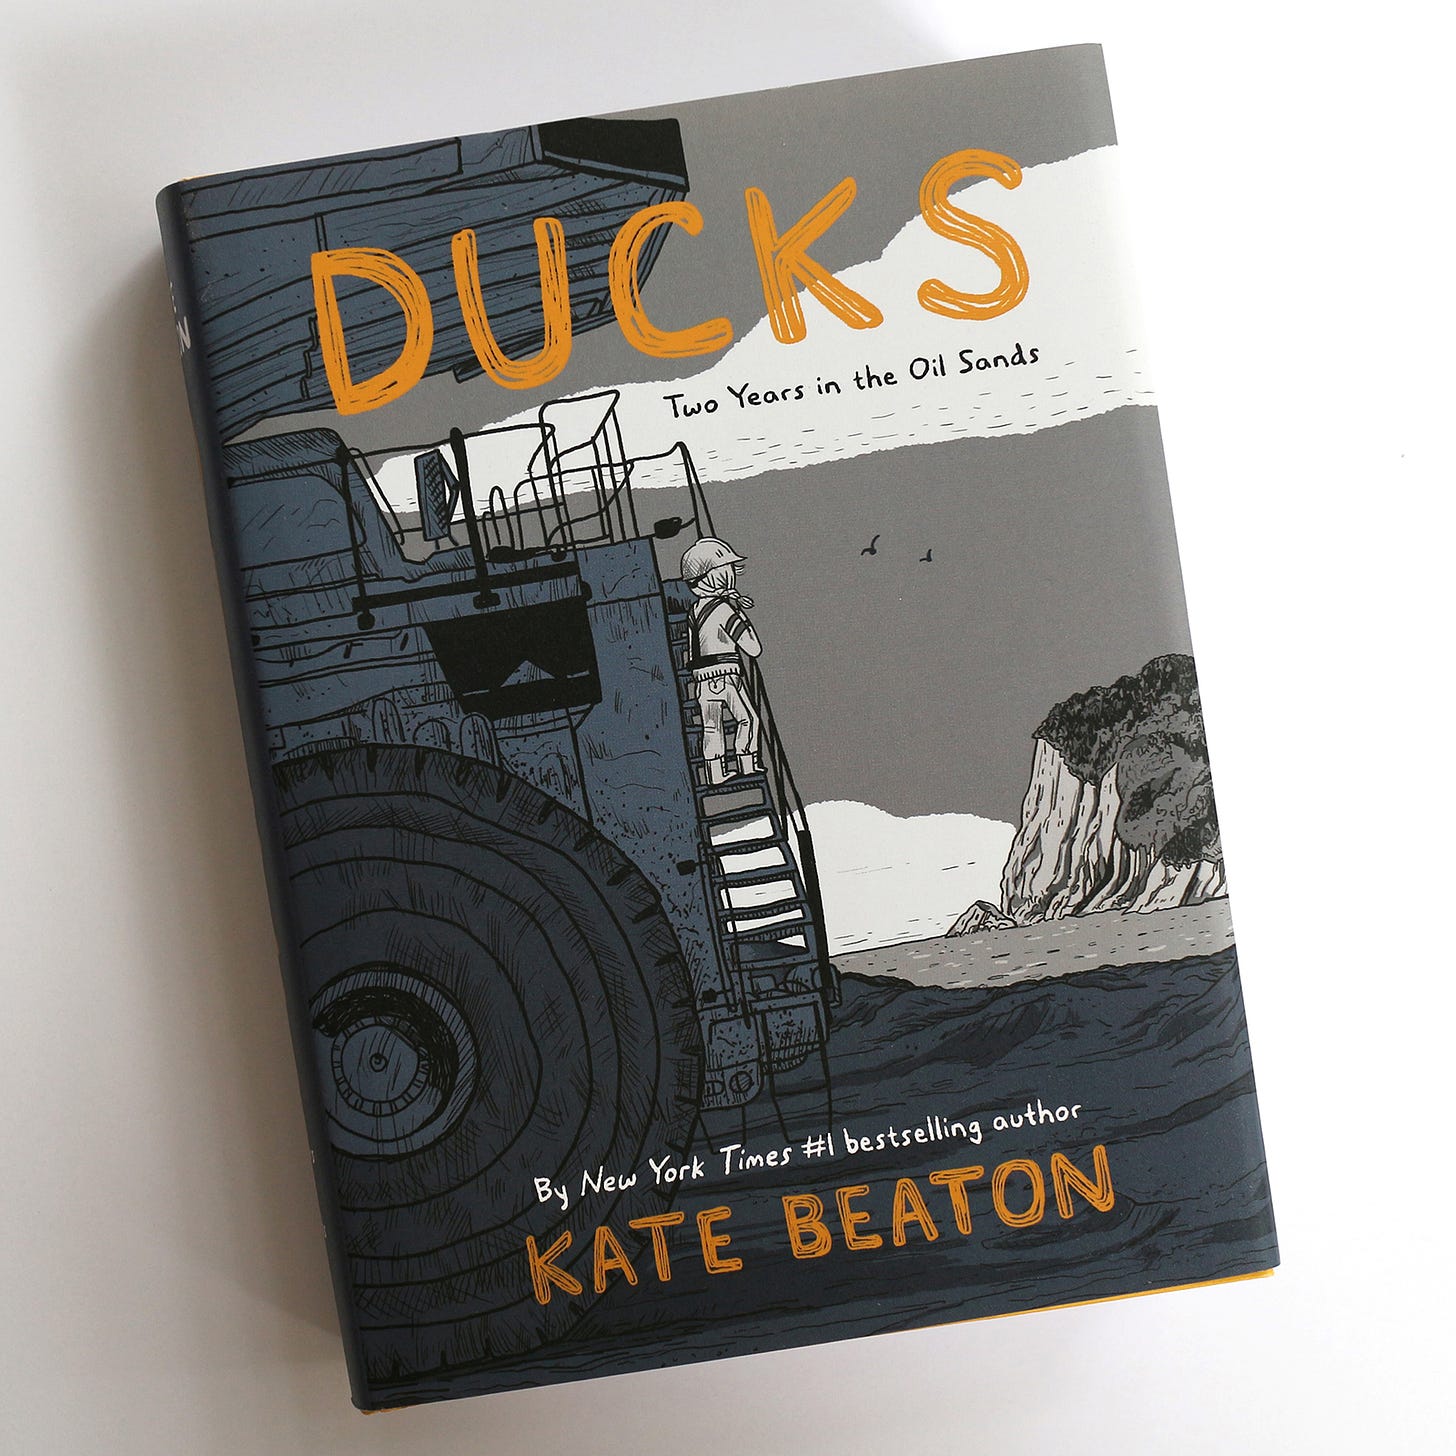 Ducks: Two Years in the Oil Sands (signed edition) – Drawn & Quarterly